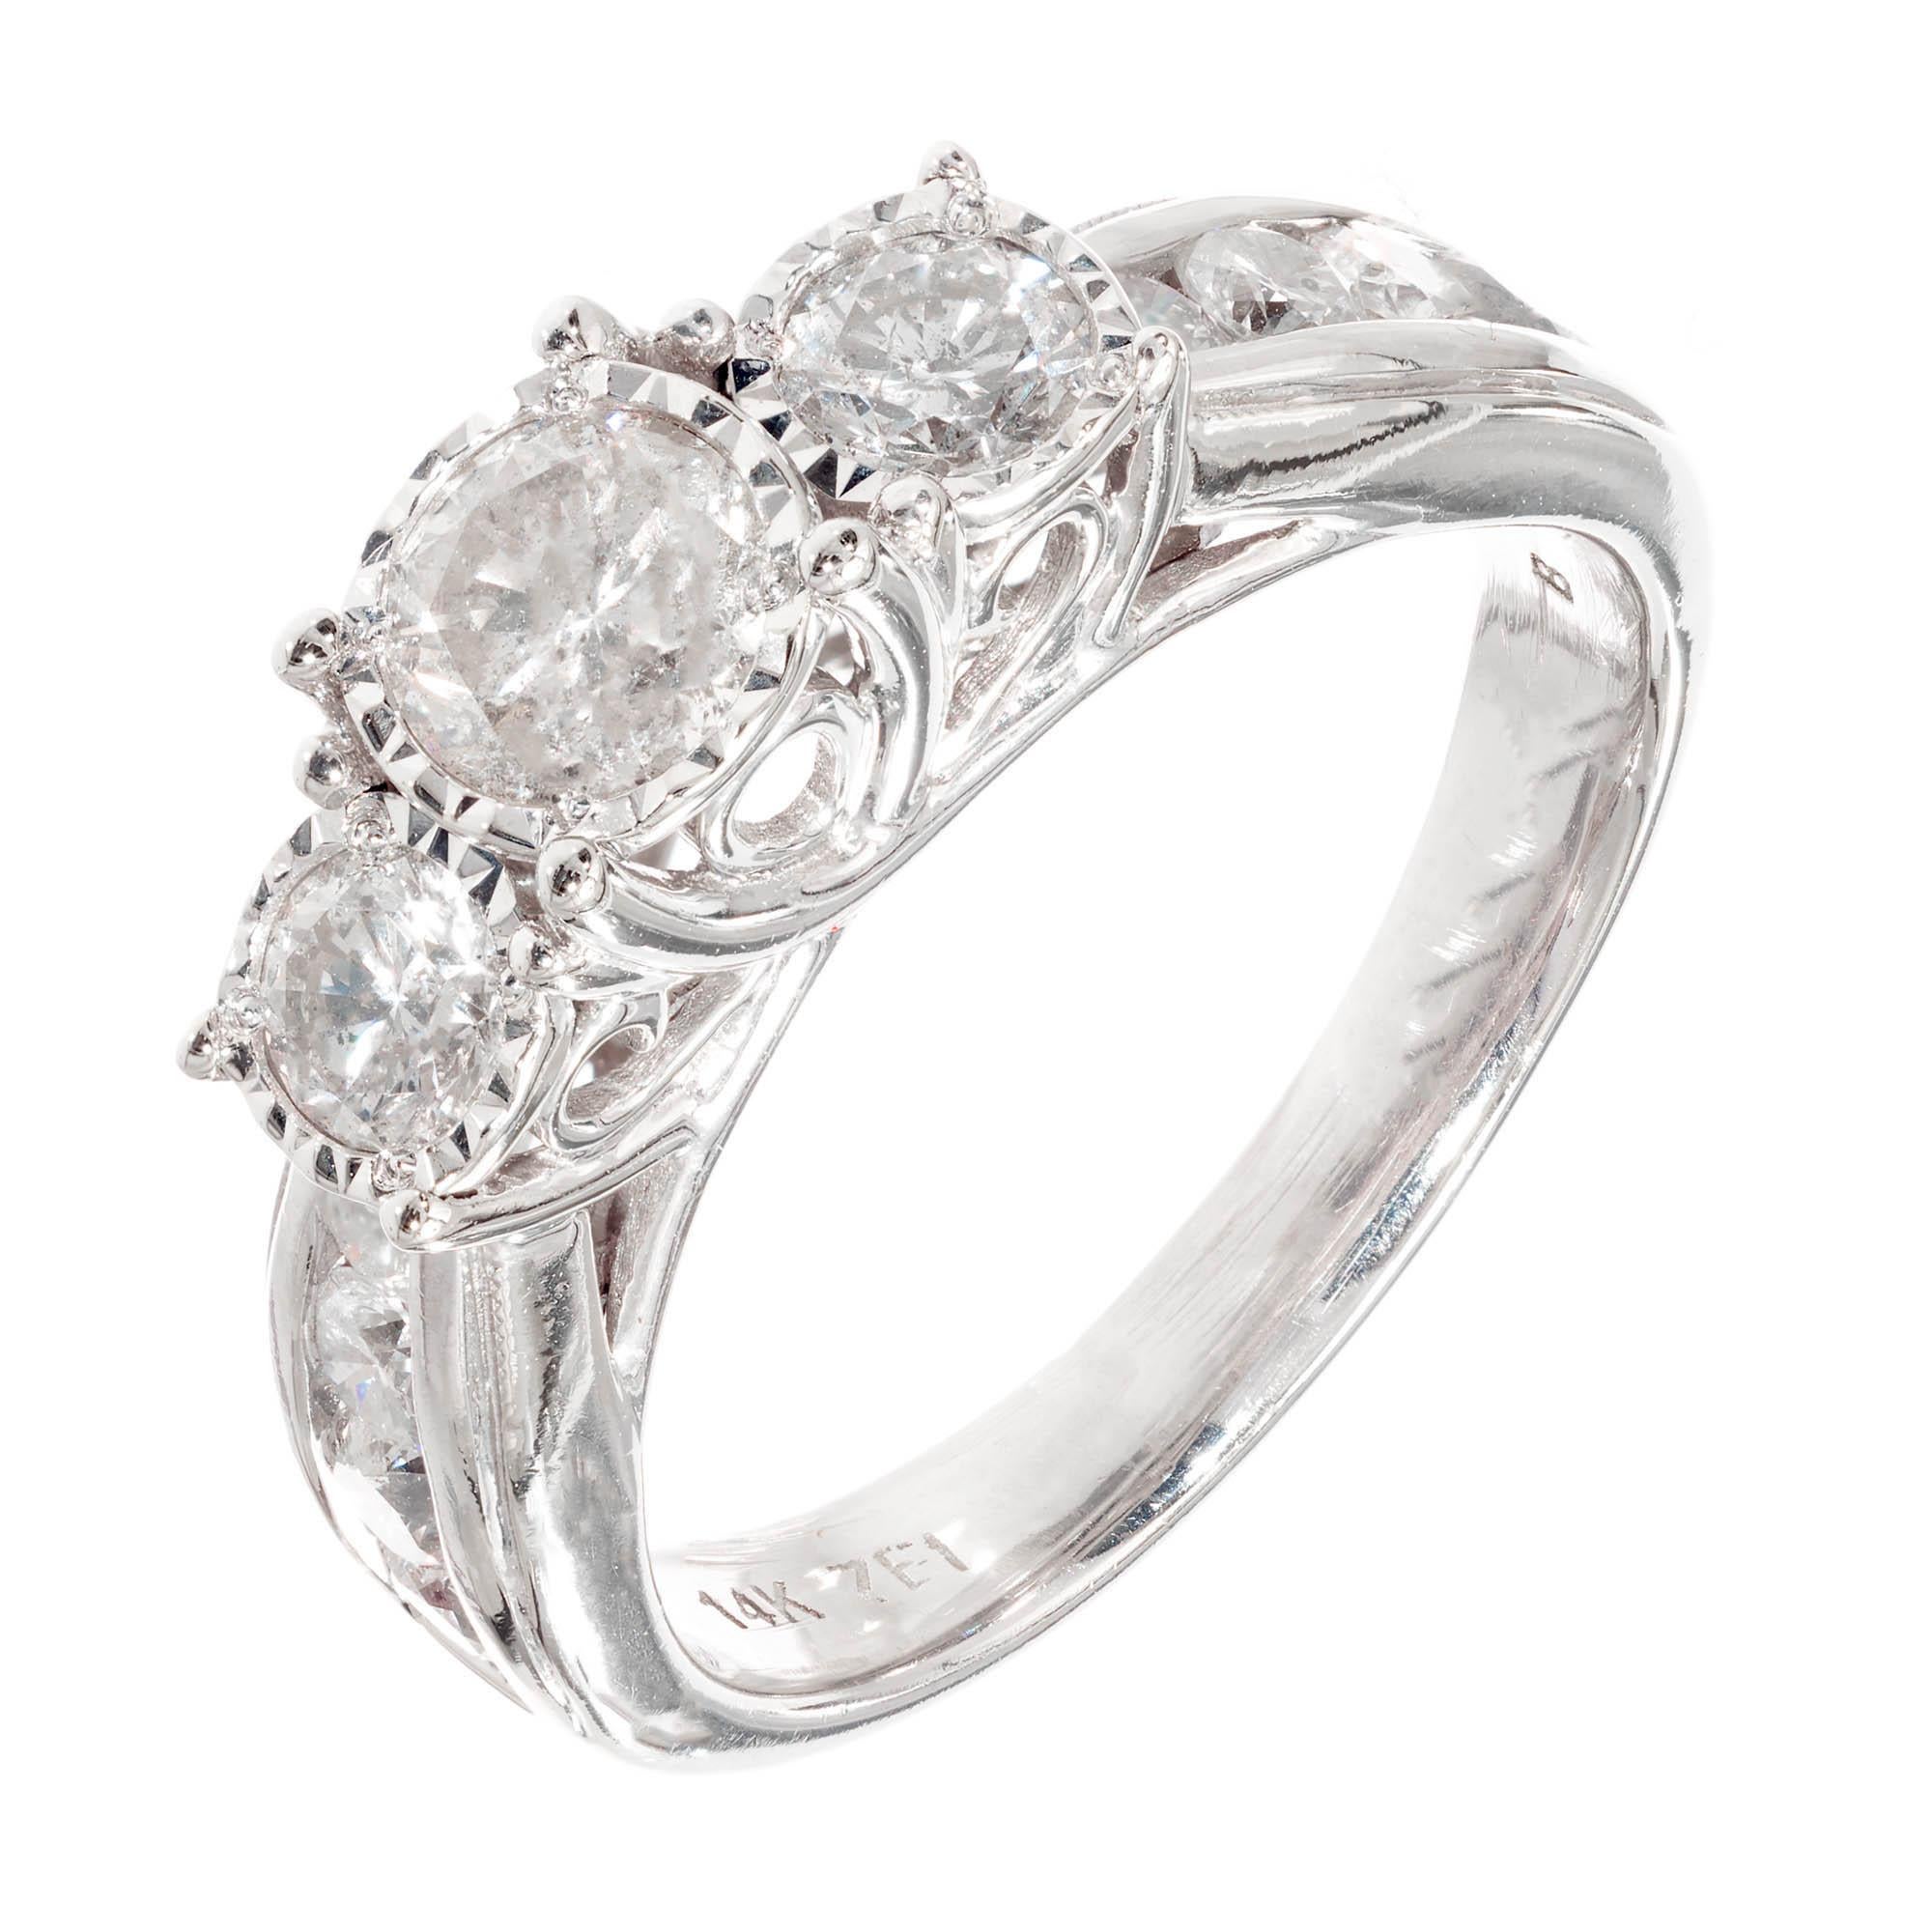 14k white gold three stone engagement style ring with side accent stones. Round brilliant cut diamonds are set across top of ring in faceted illusion style settings with an additional round brilliant diamonds channel set down each side of ring.

1